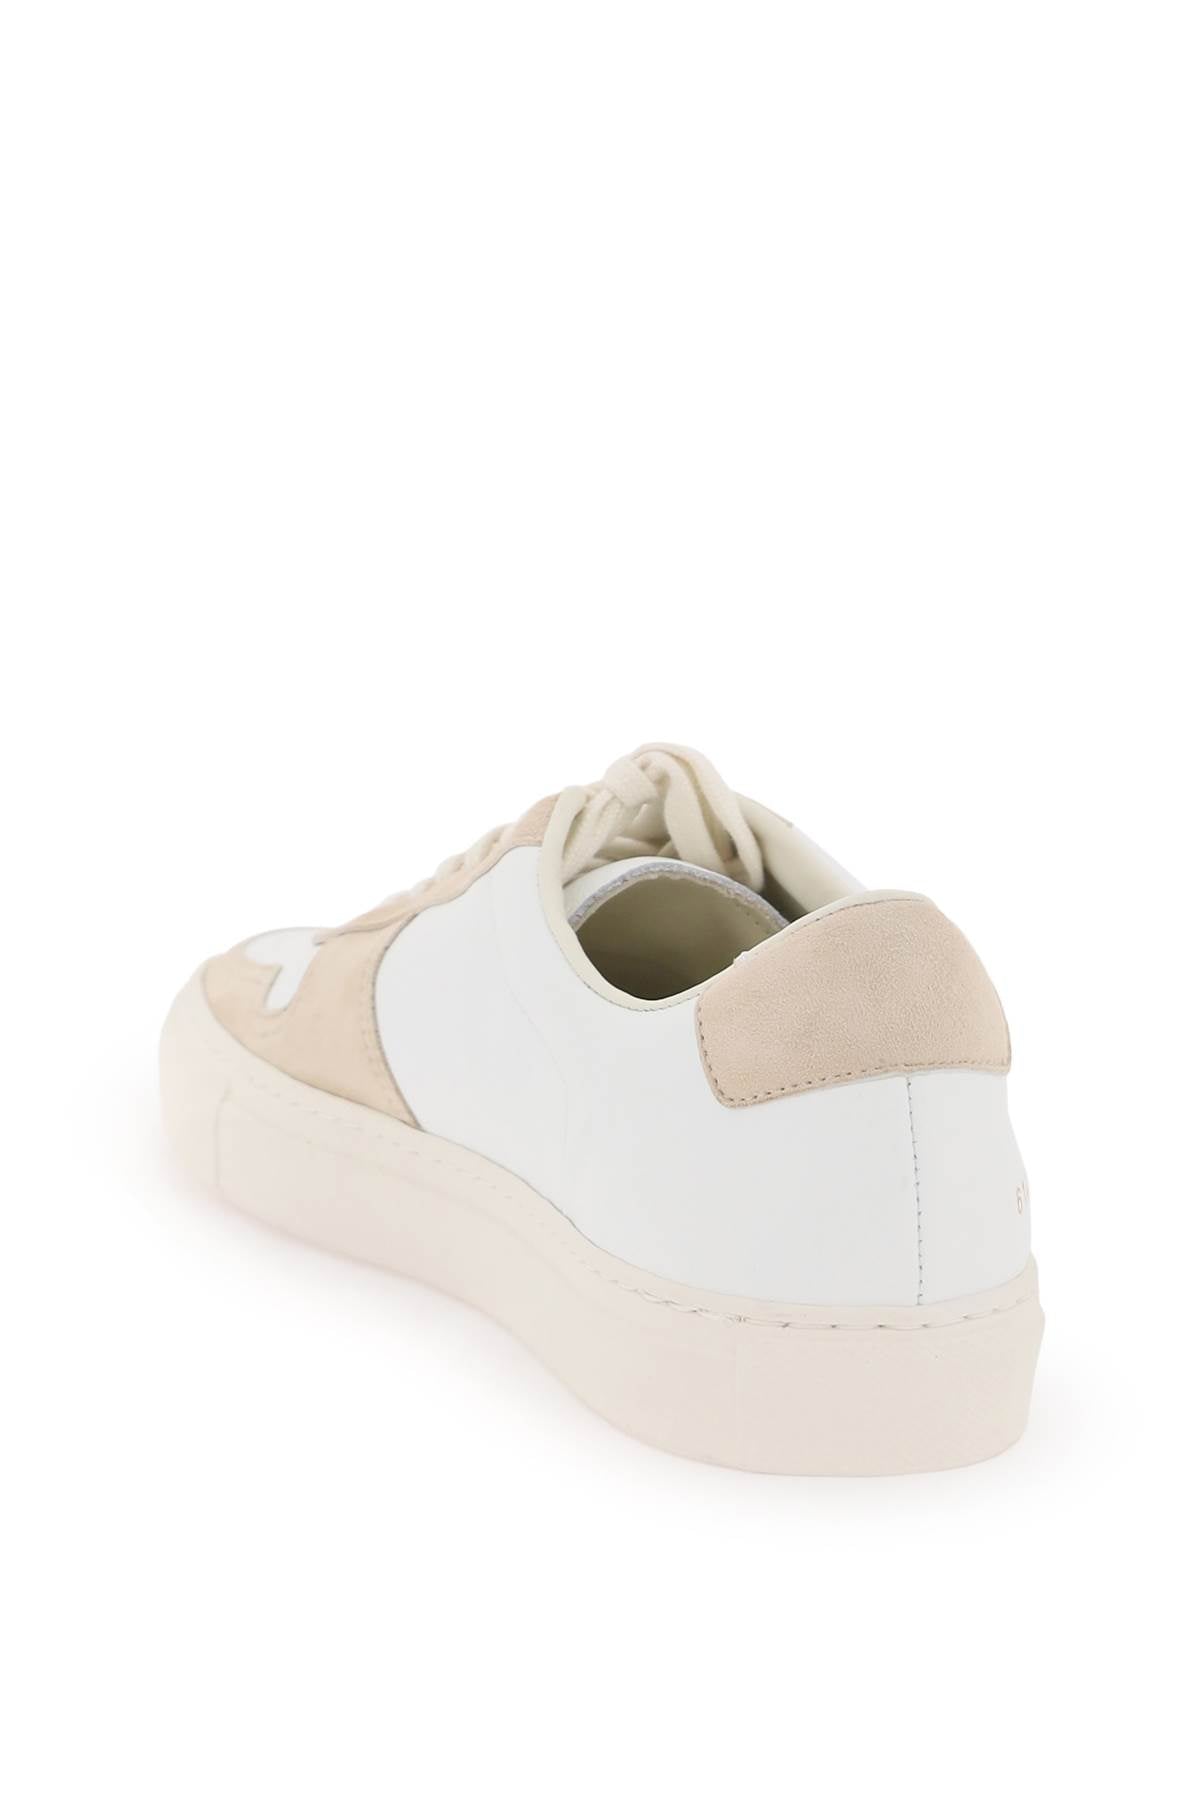 Common projects basketball sneaker-2